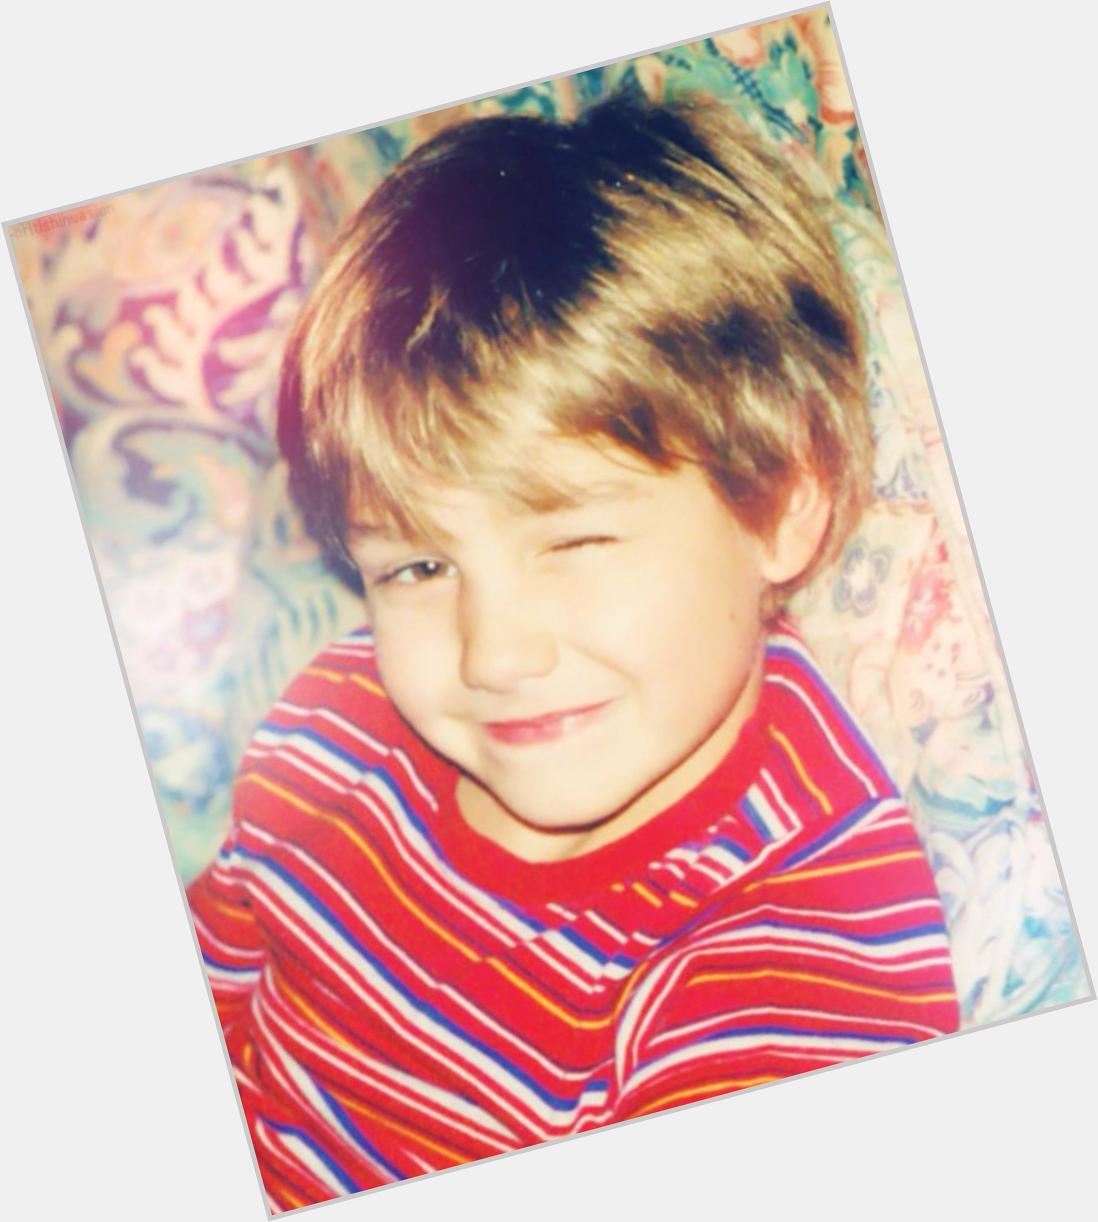 HAPPY BIRTHDAY LIAM!! I love you soooo much and I hope you have an amazing day turning 22!!!! 